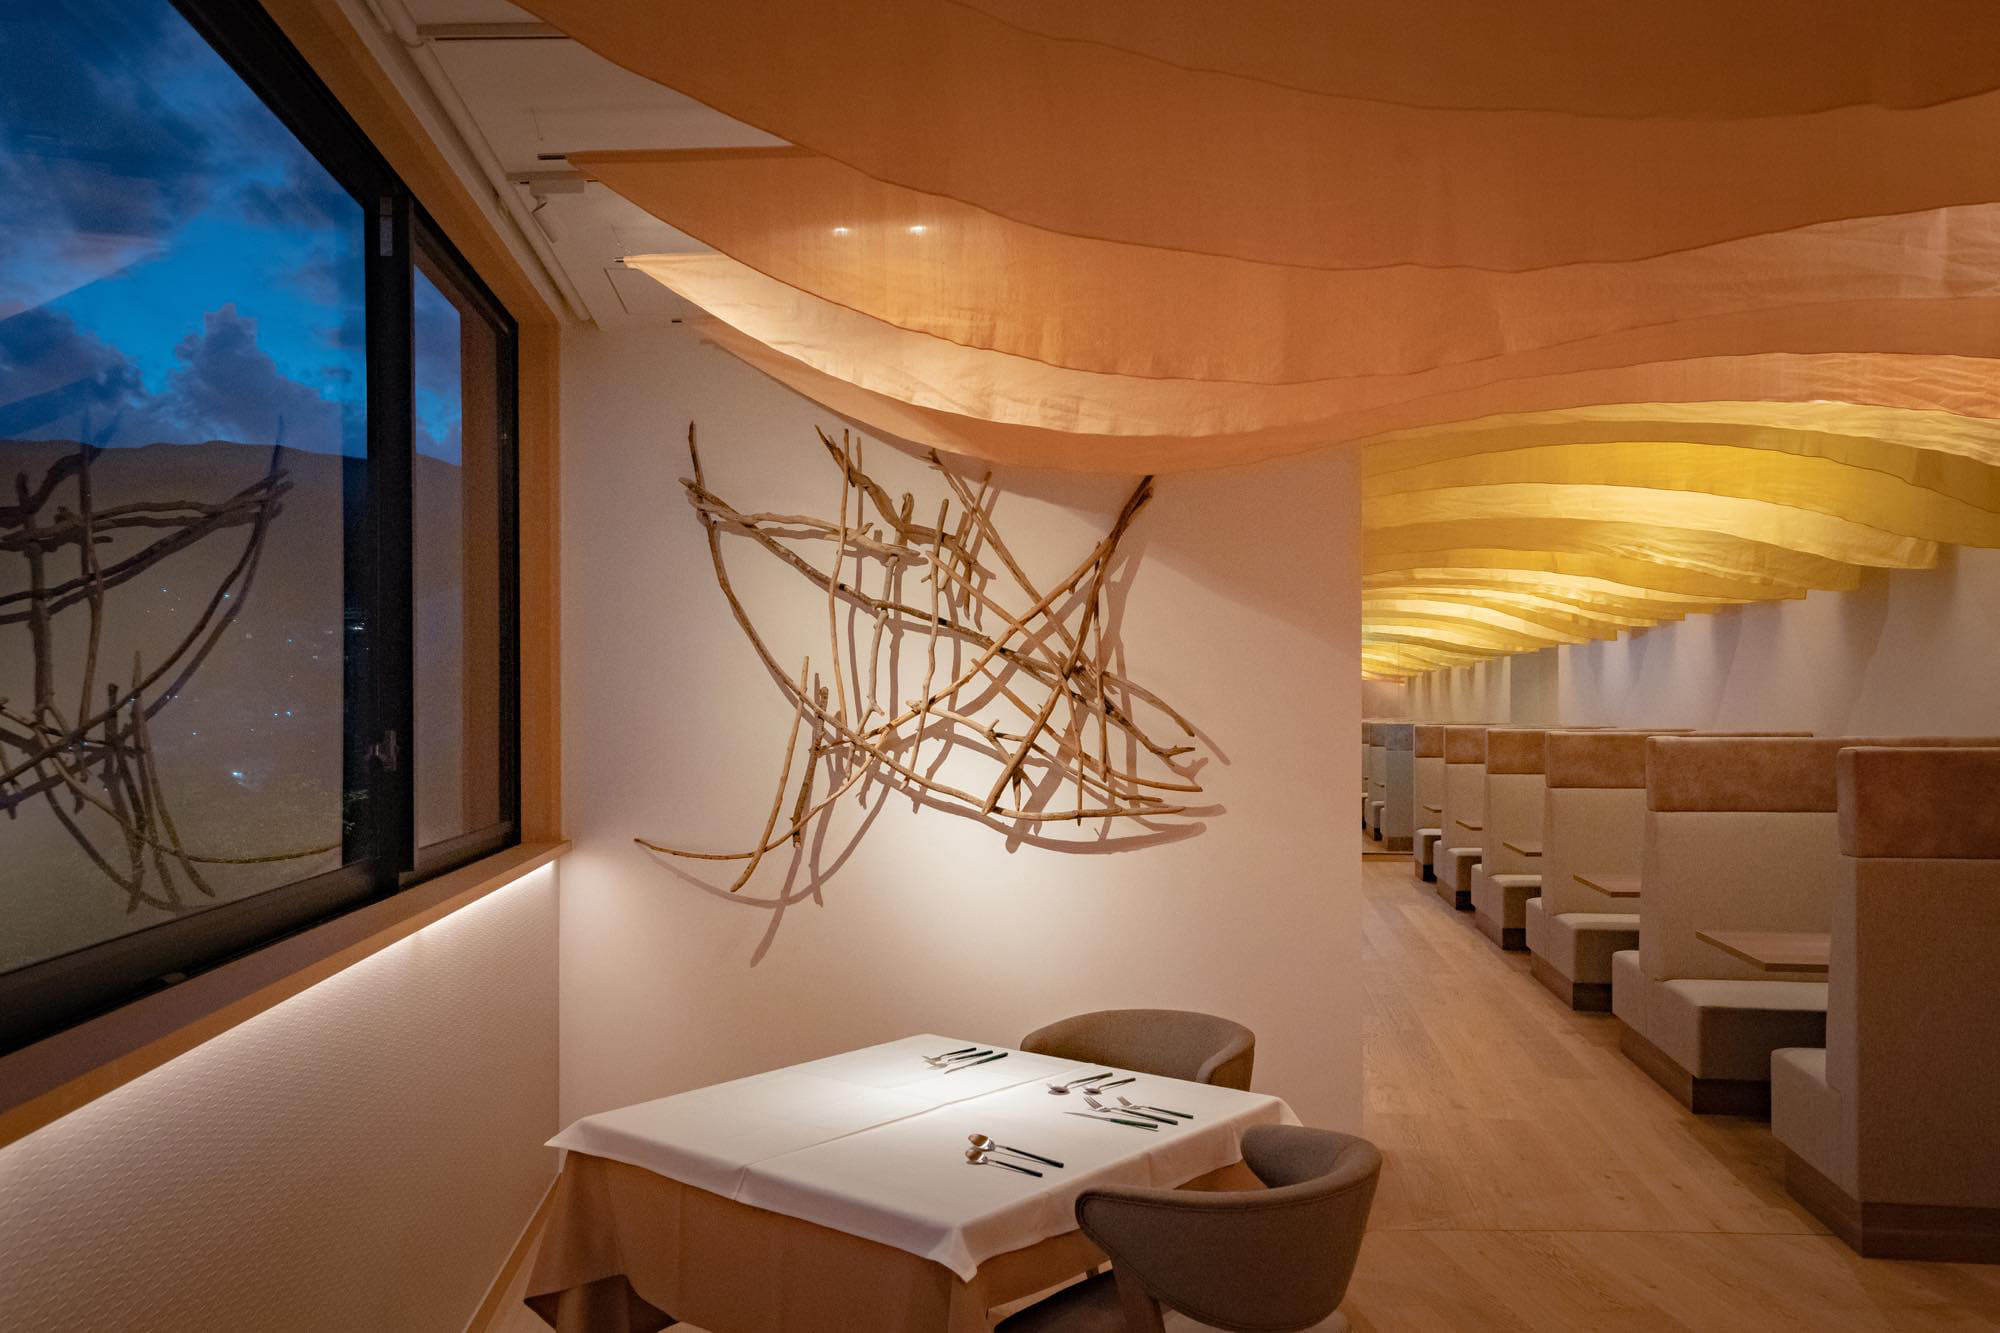 The art installation using silk and driftwoods, is a work by Koji Arai, a fashion designer based in Atami.